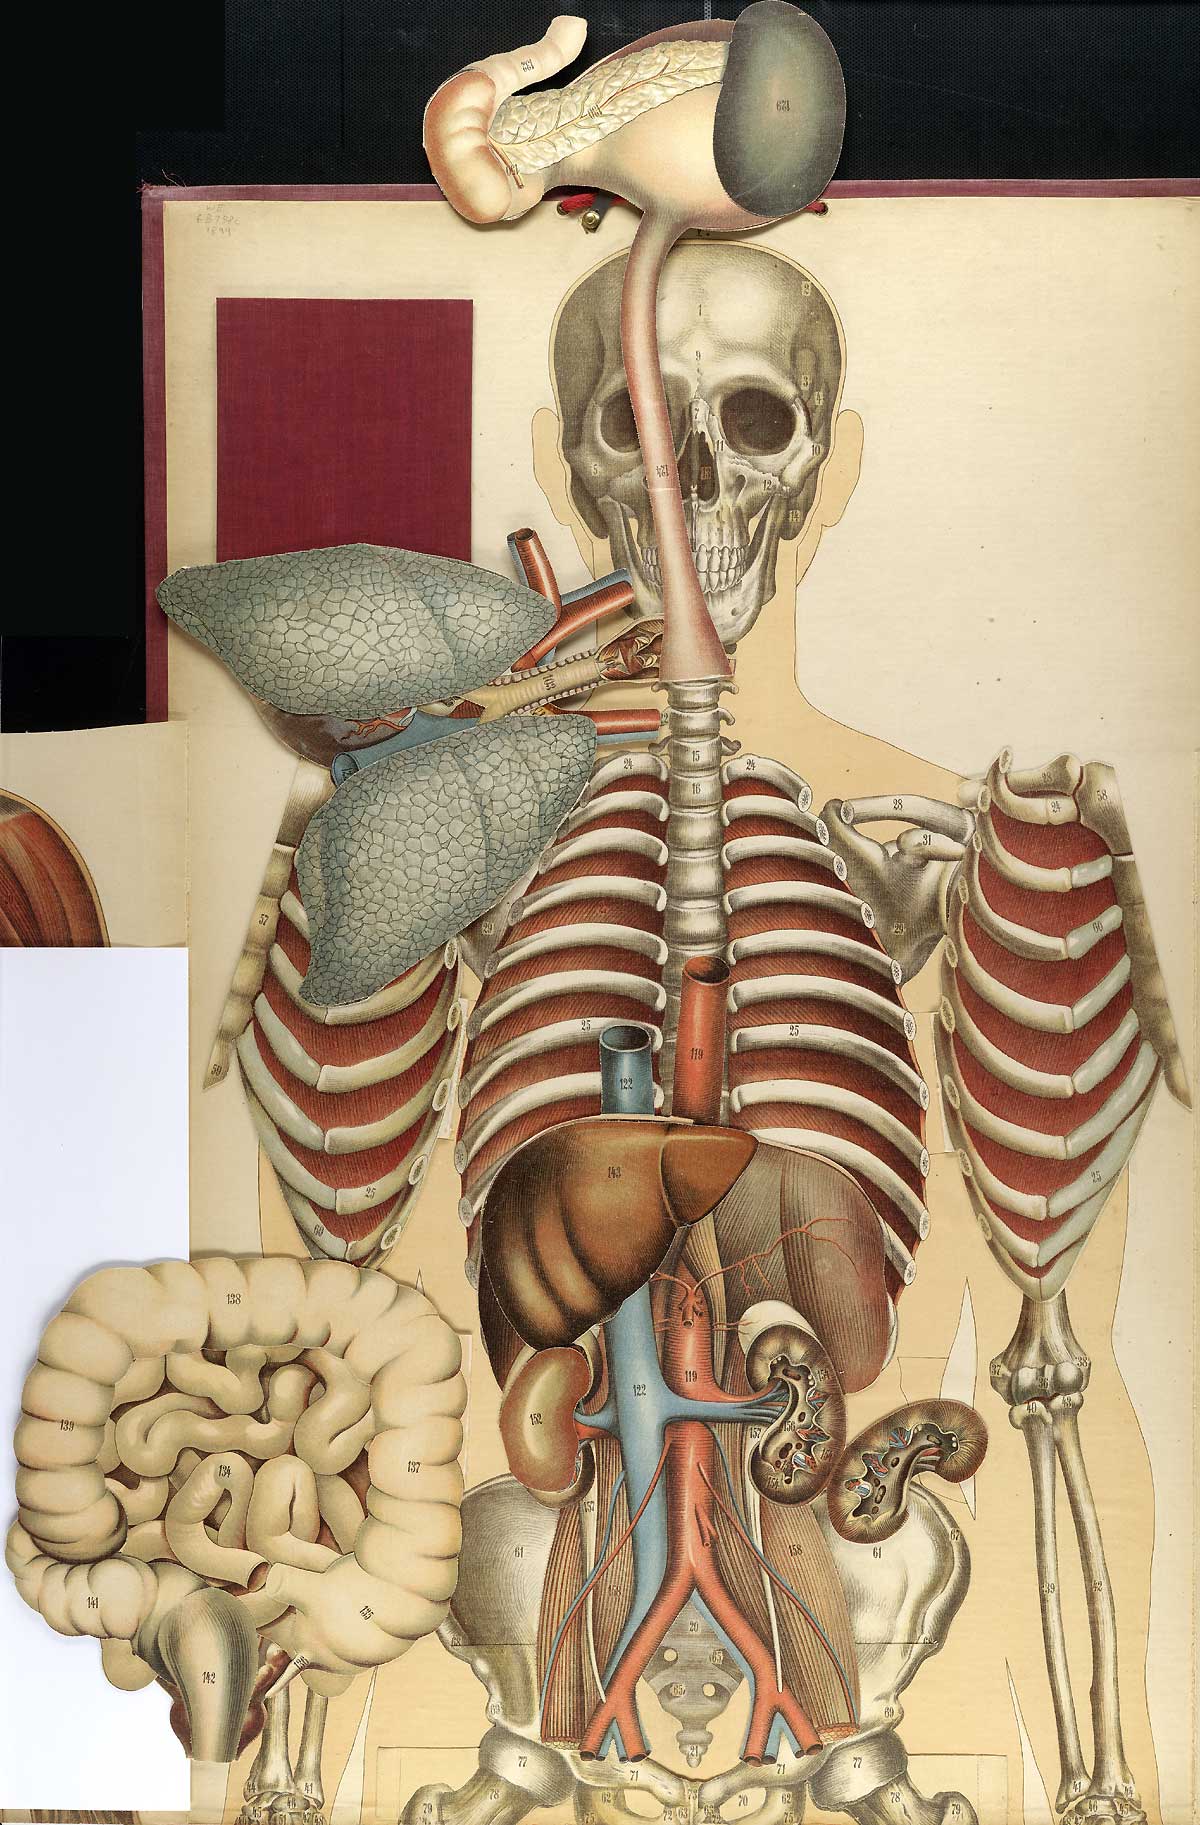 Chromolithograph showing the internal organs of the upper half of the front of the human body, including the stomach, intestines, lungs, heart, liver, and kidneys, from Julien Bouglé’s Le corps humain en grandeur naturelle, NLM Call no. WE B758c 1899.